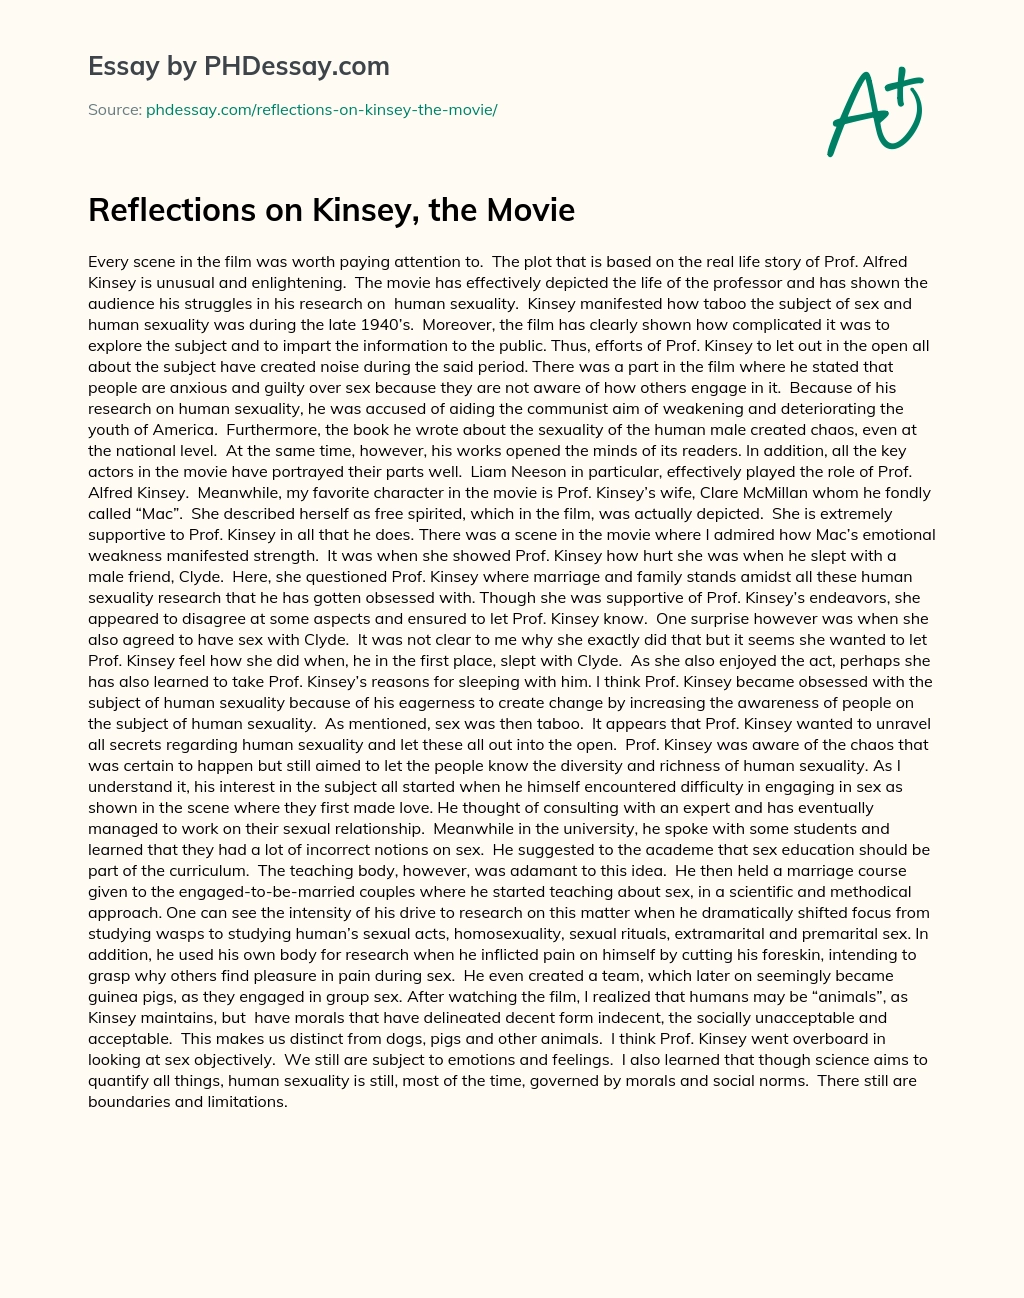 Reflections on Kinsey, the Movie essay